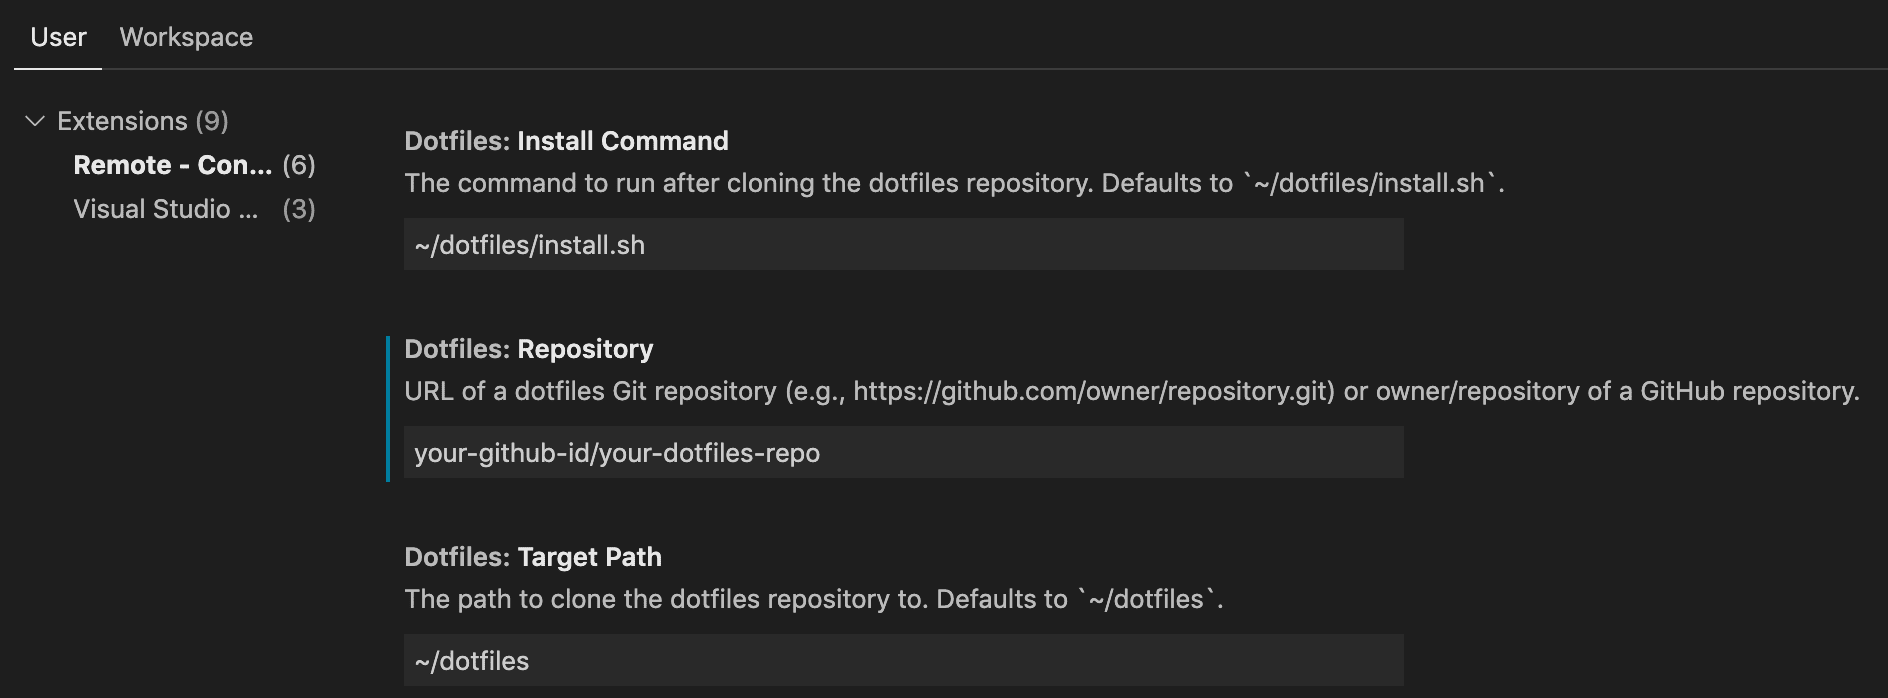 Settings for dotfiles